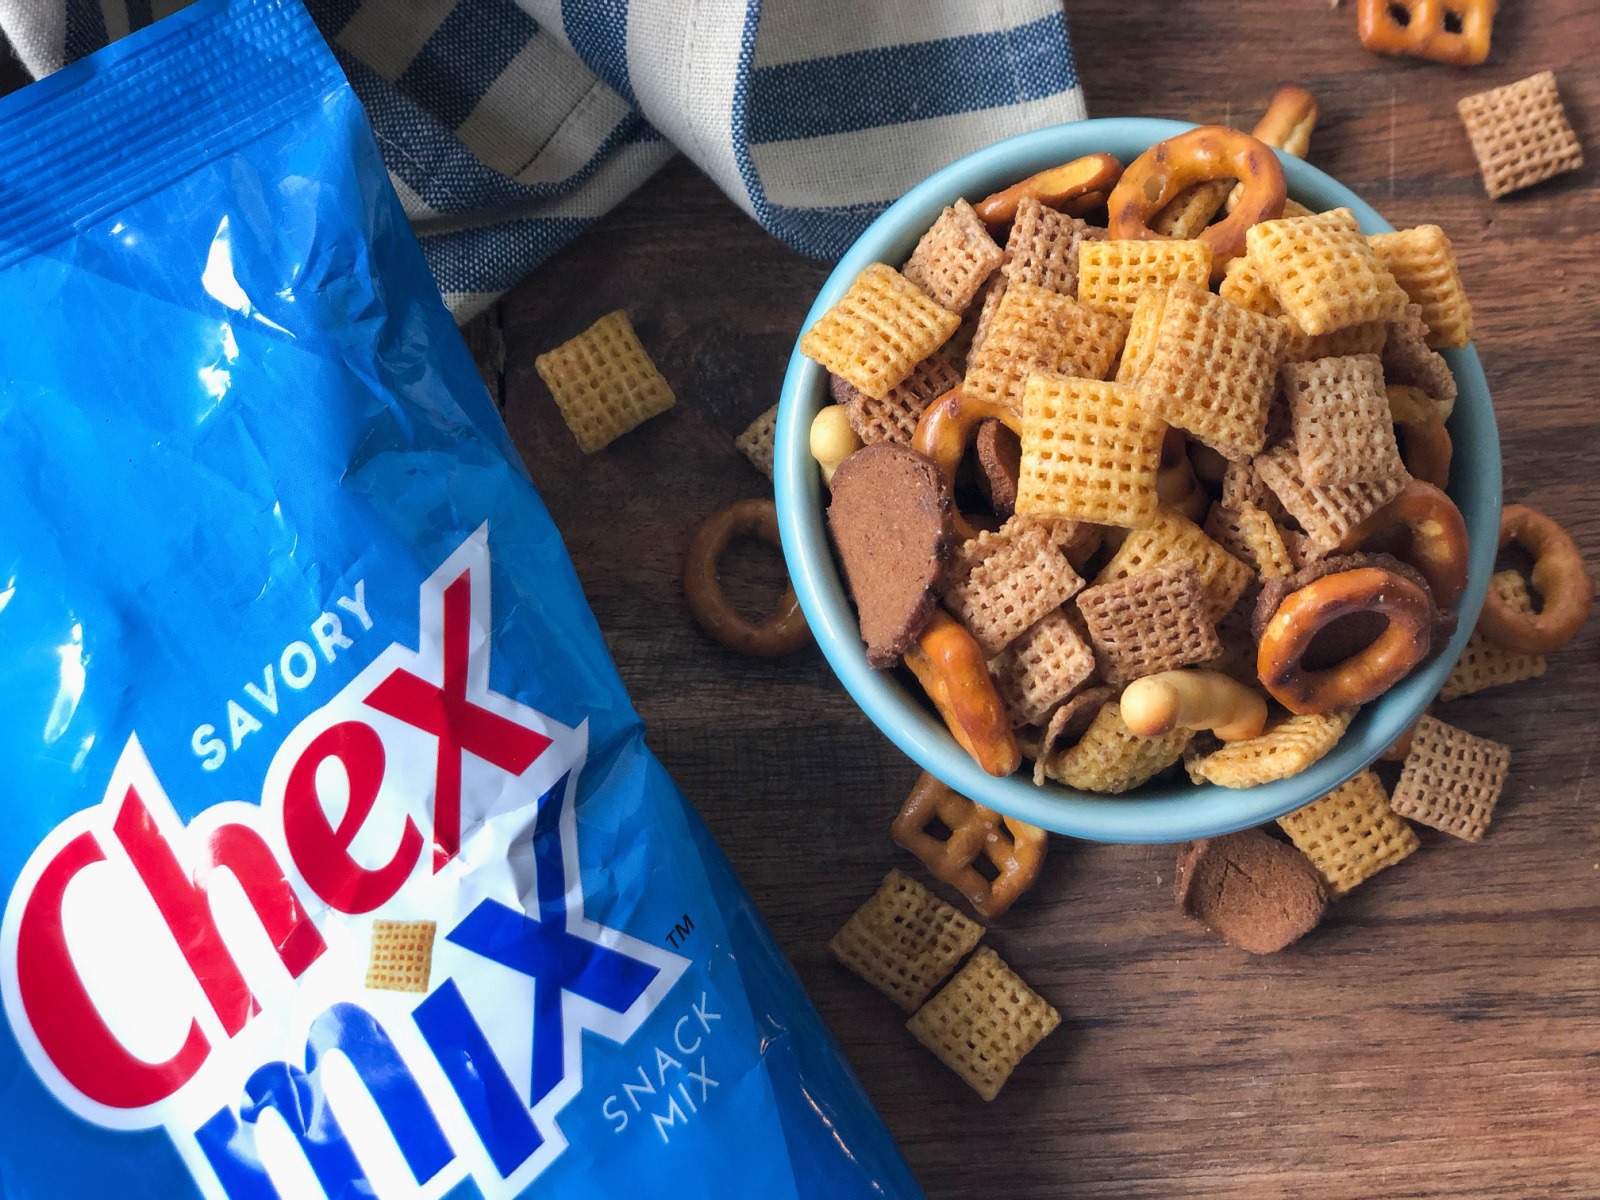 Get Family Size Bags Of Chex Mix For As Little As $1.92 Per Bag At Publix